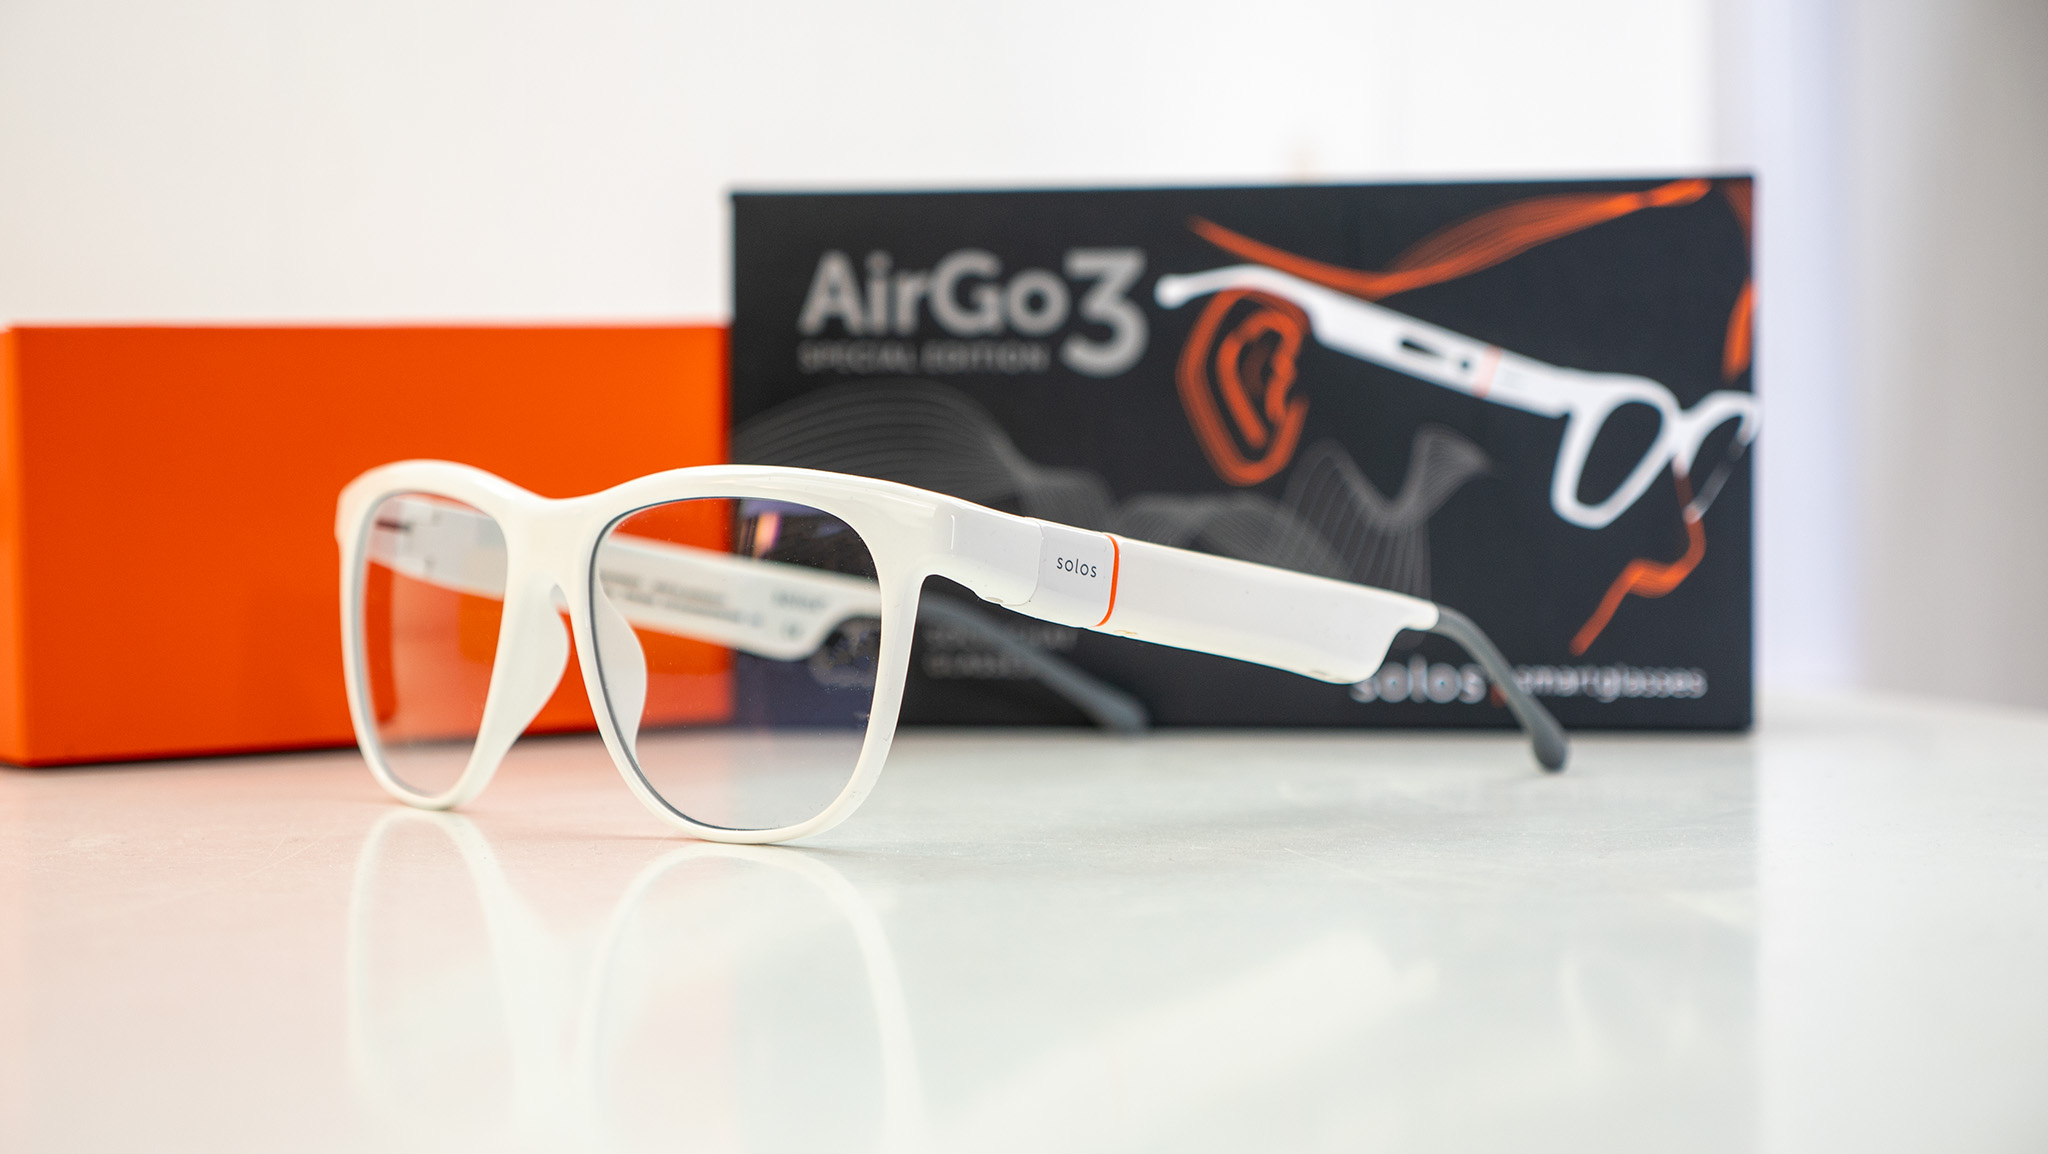 Solos debuts AirGo 3 Smart Glasses that can translate languages